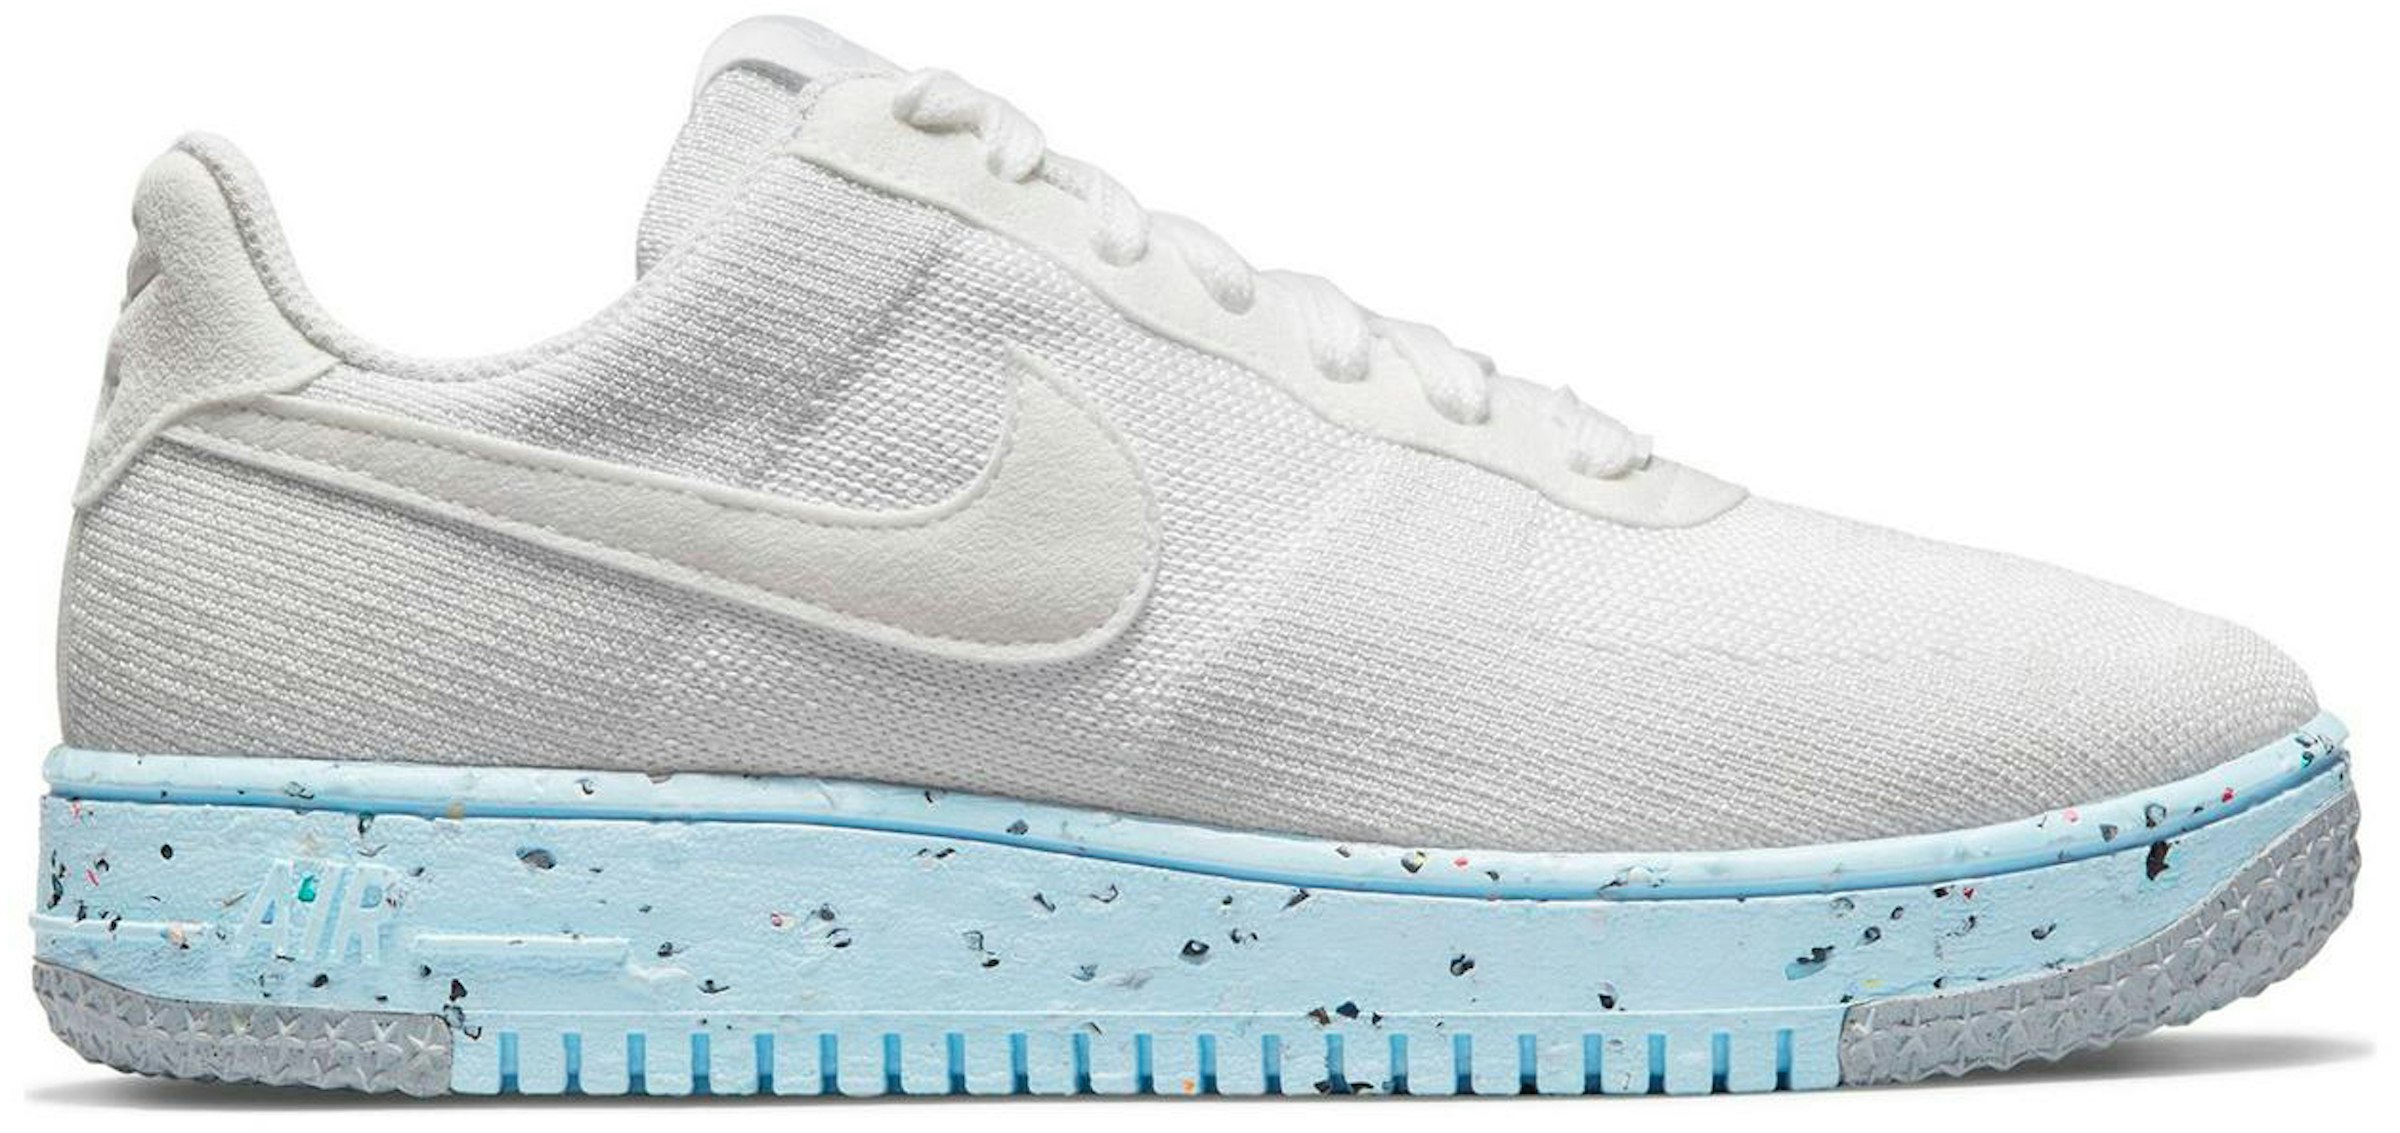 Nike Air Force 1 Flyknit White Ice Blue (Women's) DC7273-100 - US